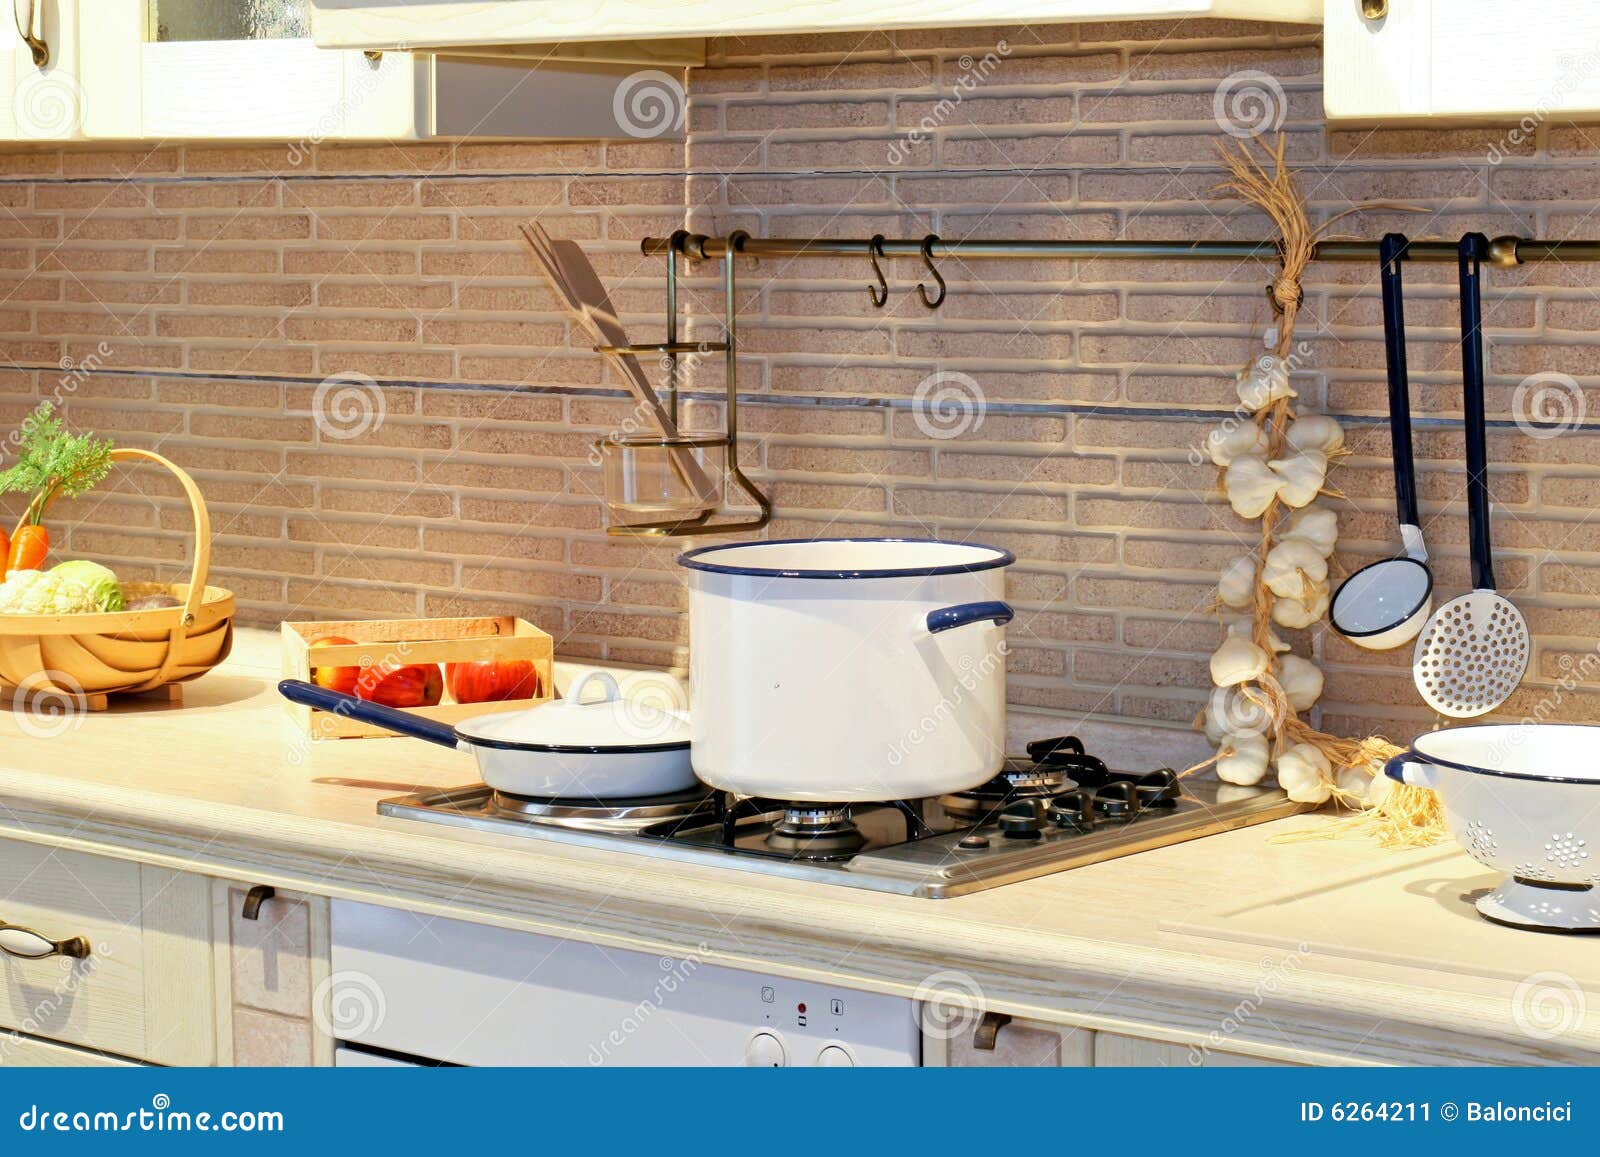 Cooking pot on the stove Stock Photo by ©eskaylim 118705498